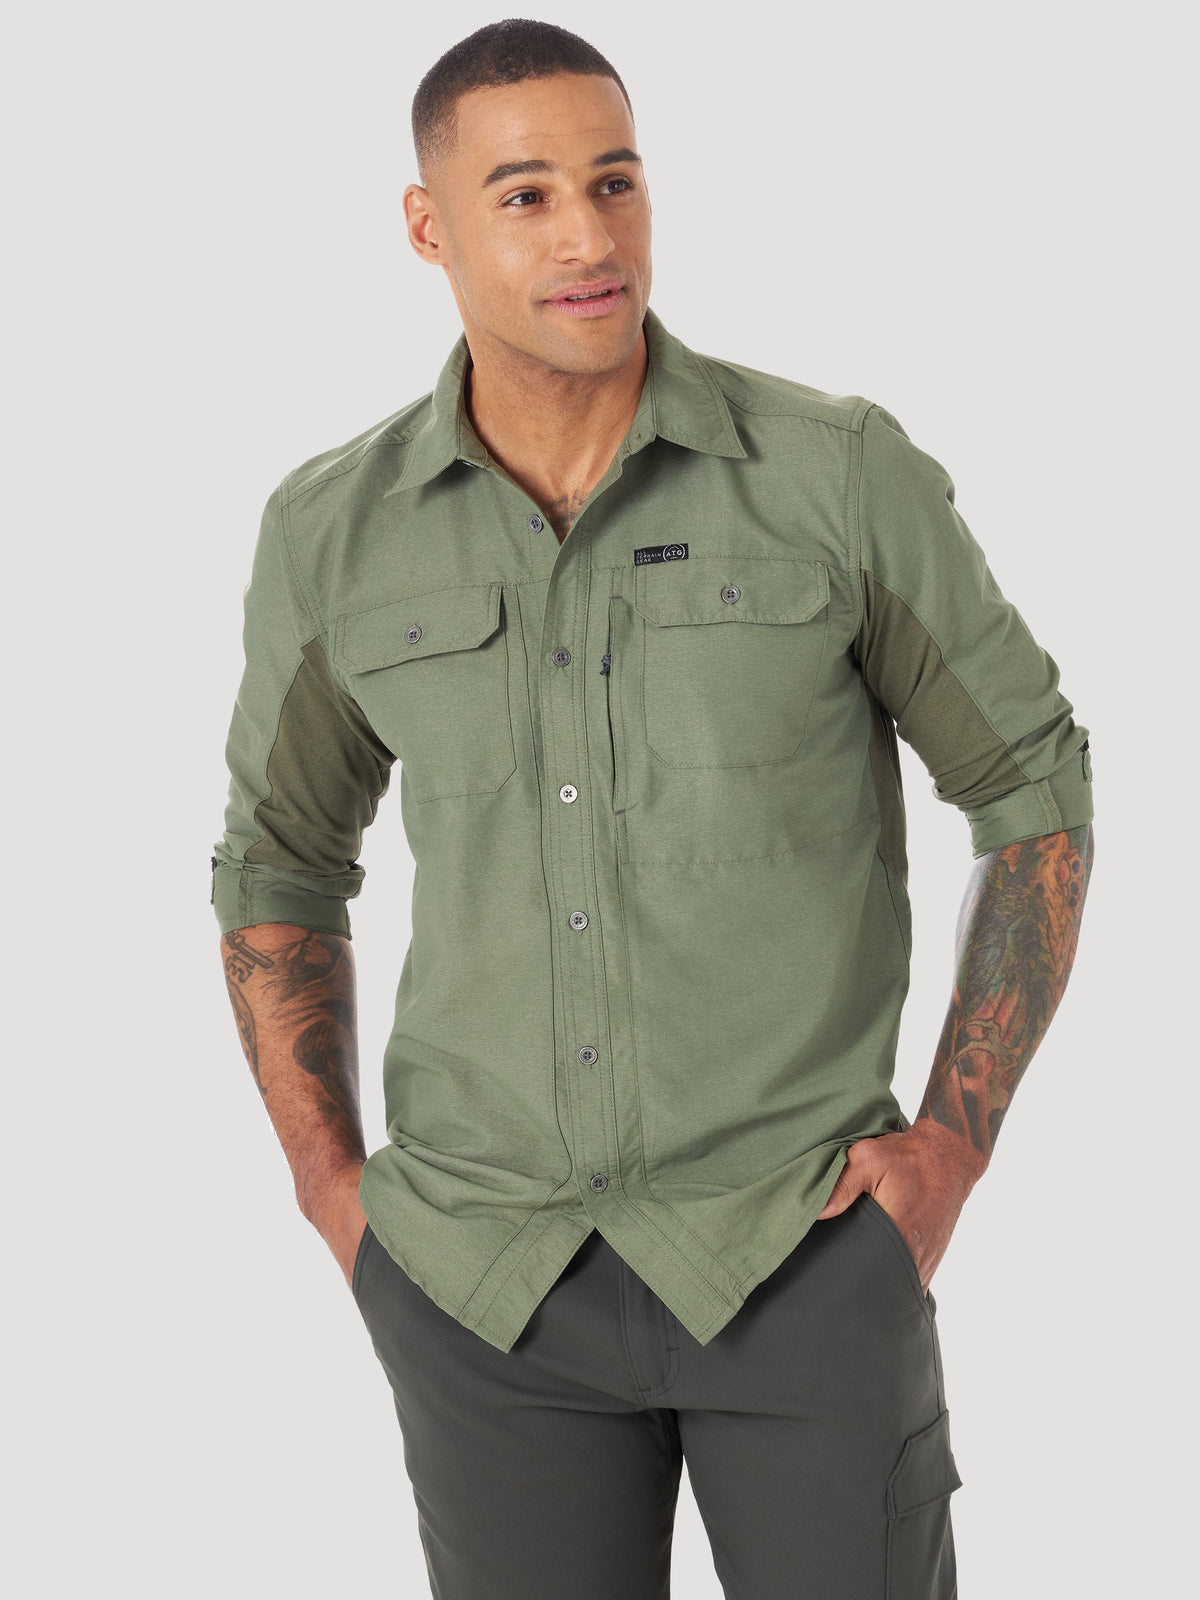 All Terrain Gear Mixed Material Shirt in Dusty Olive